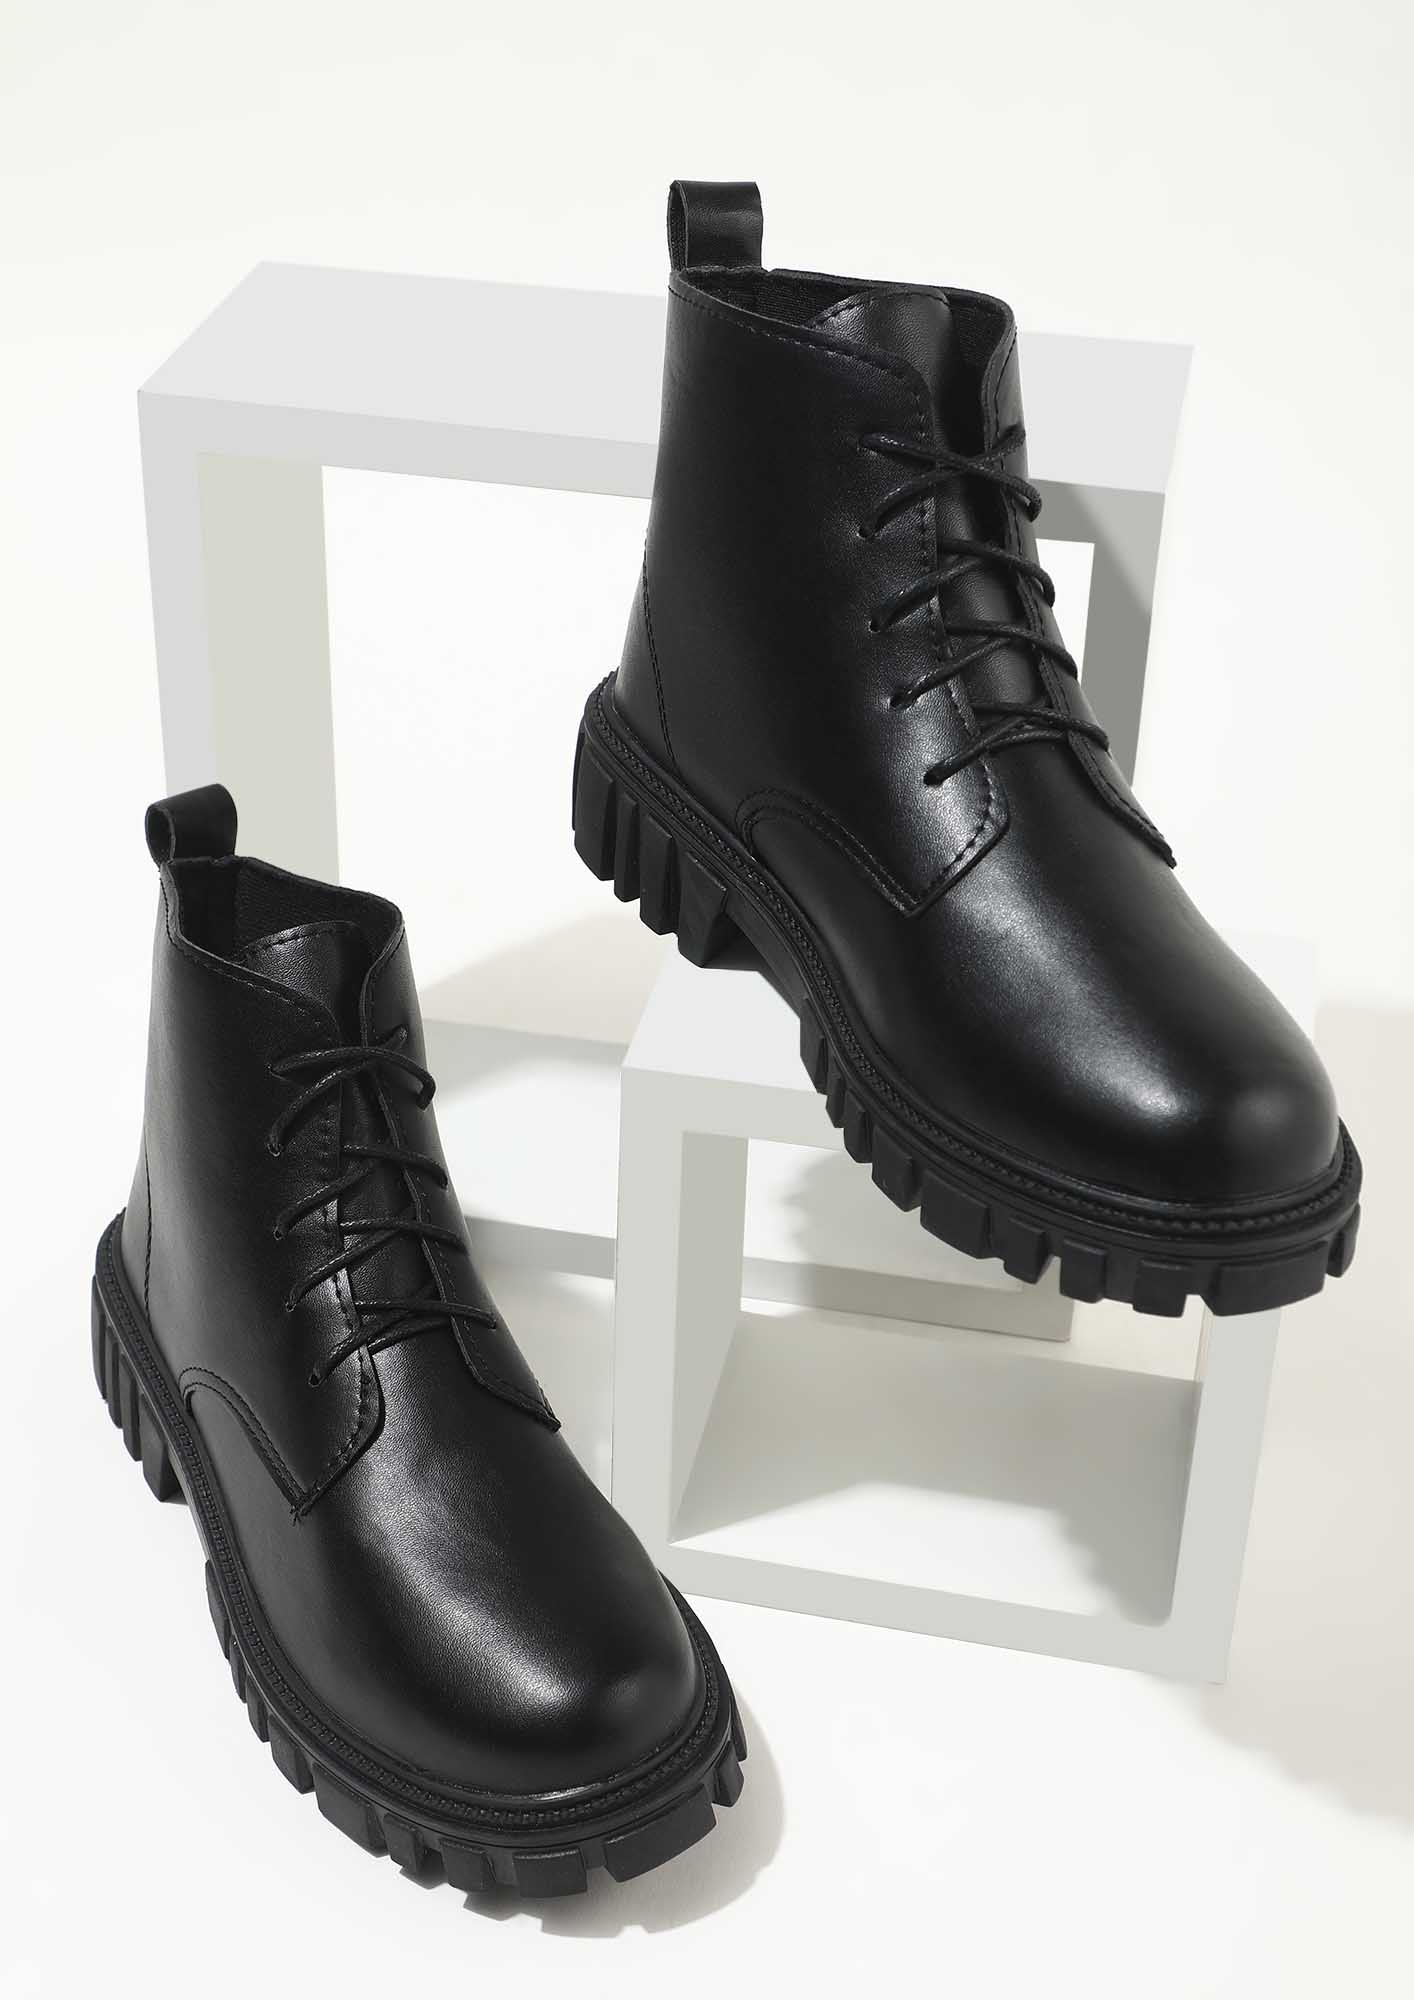 FEEL GORGEOUS BLACK BOOTS